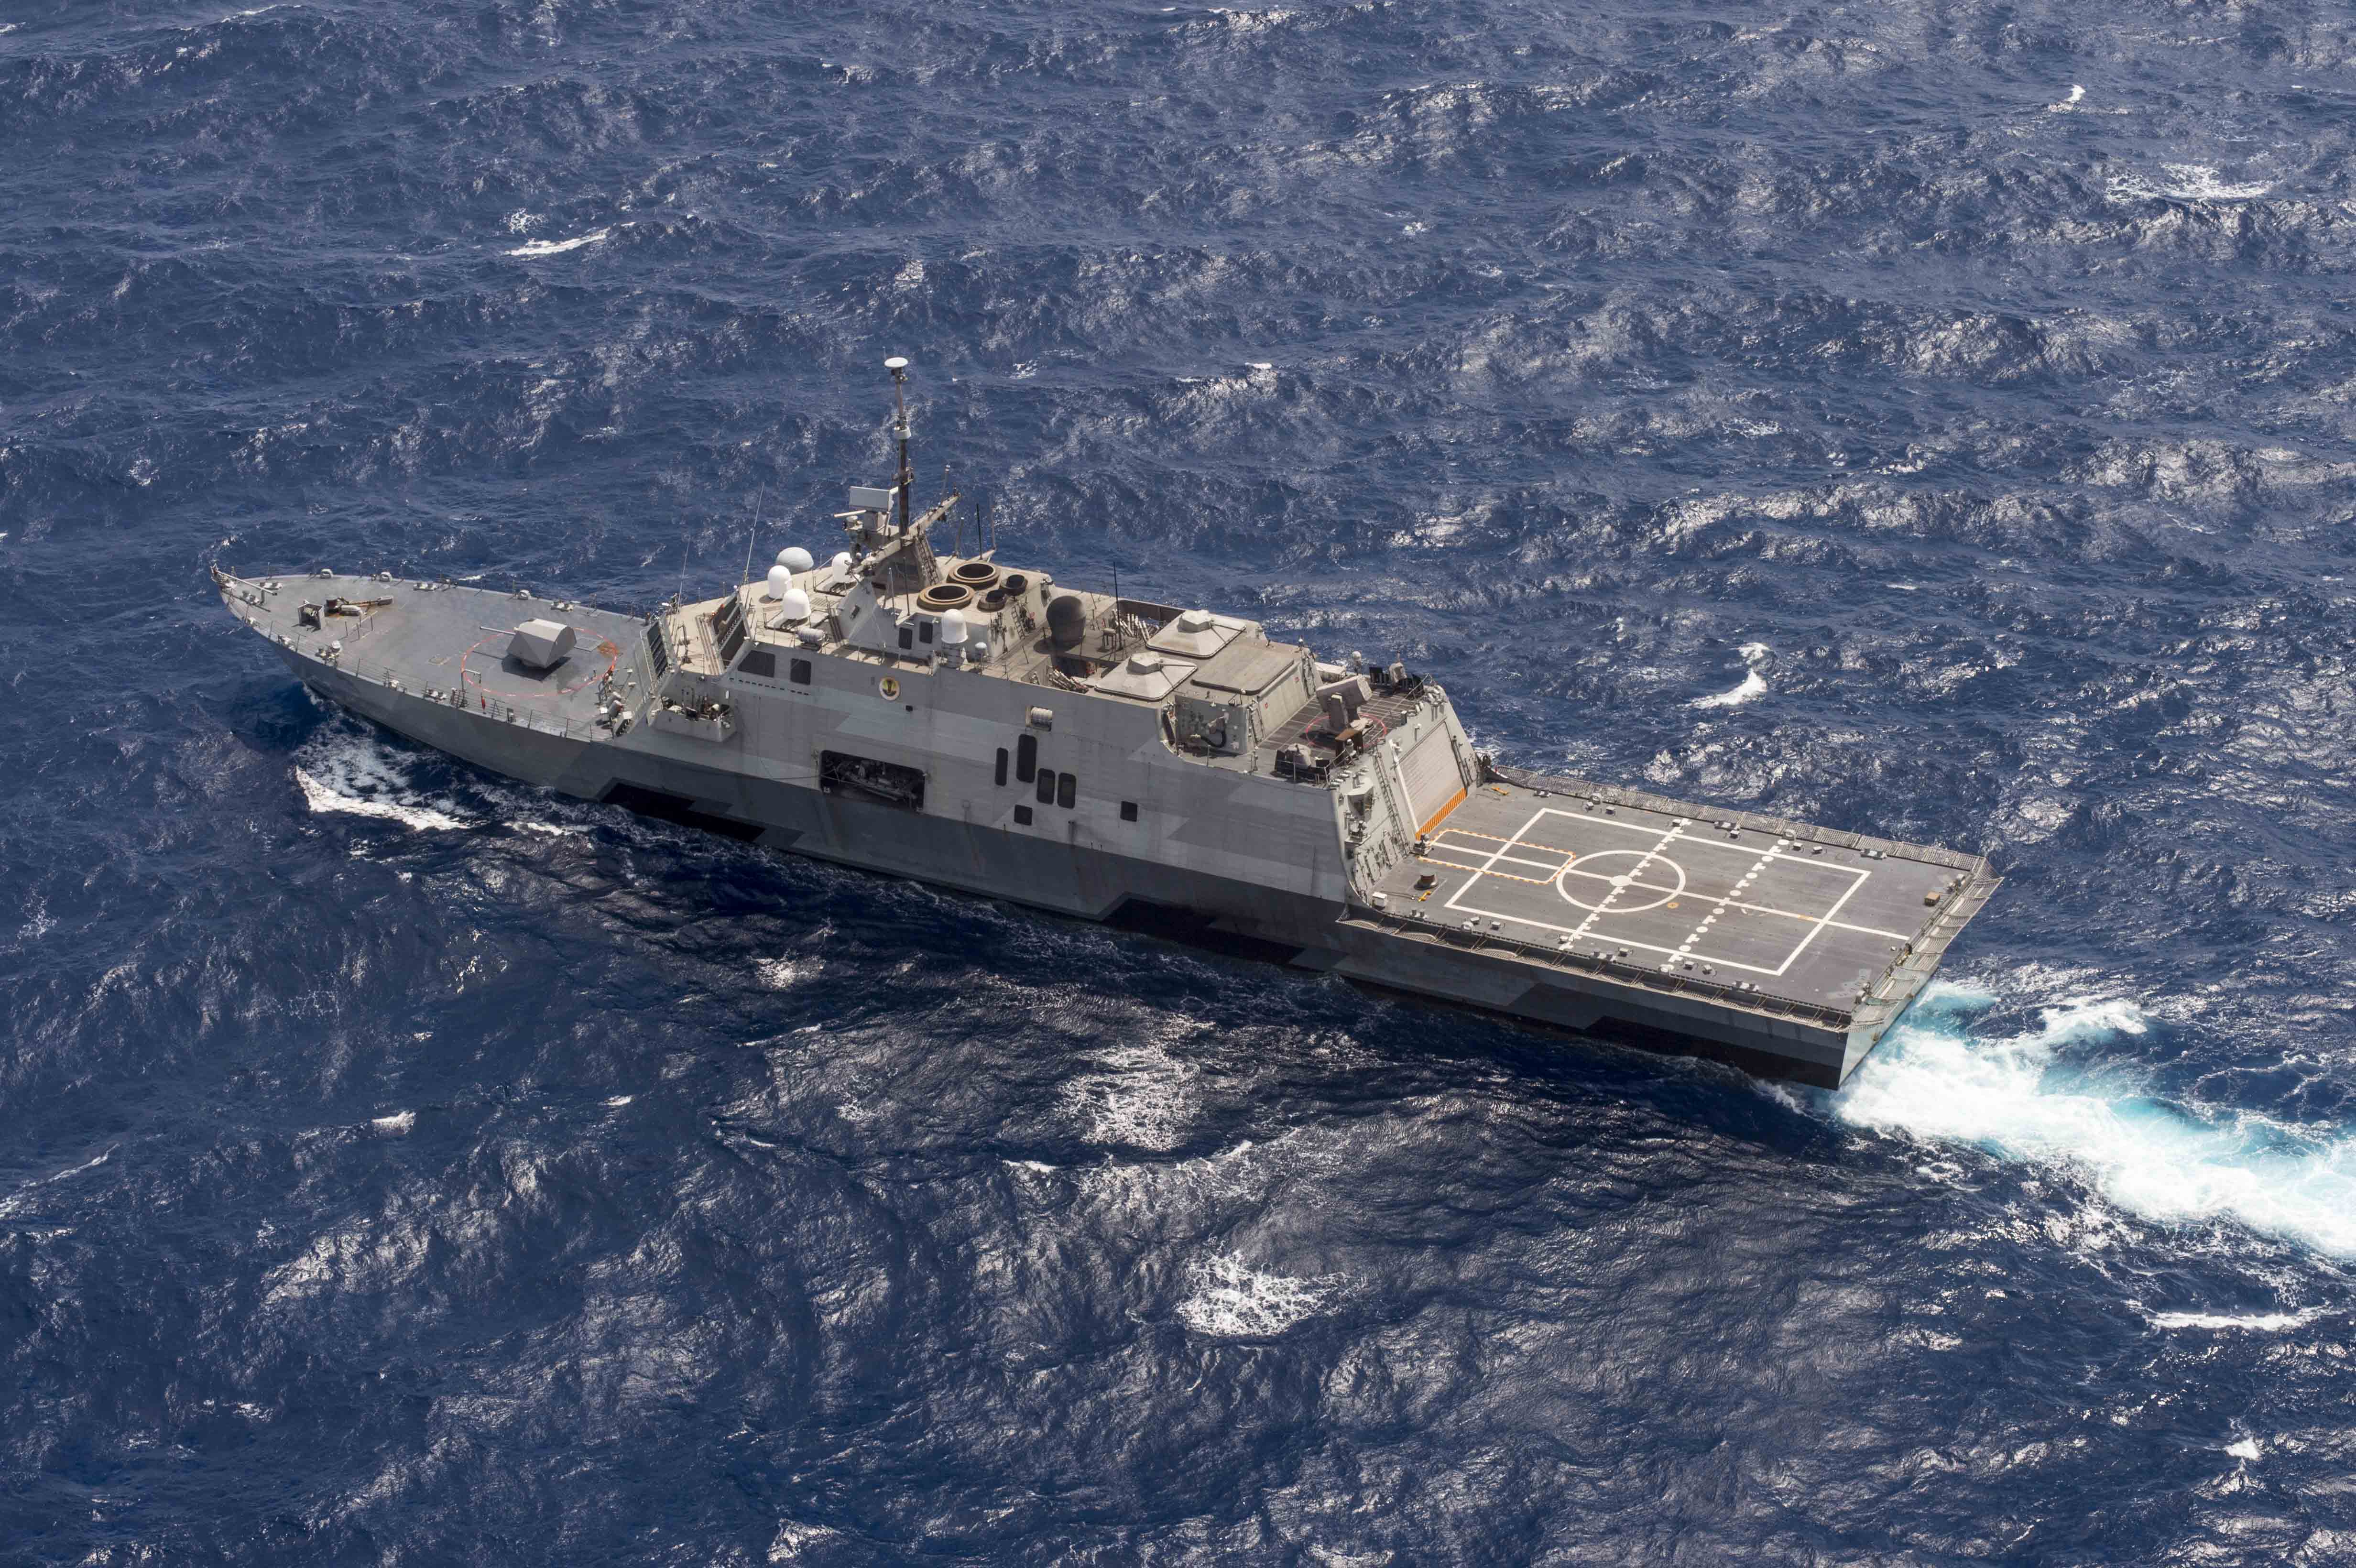 USS Fort Worth (LCS 3) transits the South China Sea in July 2015 during a 16-month rotational deployment in support of the Indo-Asia-Pacific rebalance. US Navy photo.